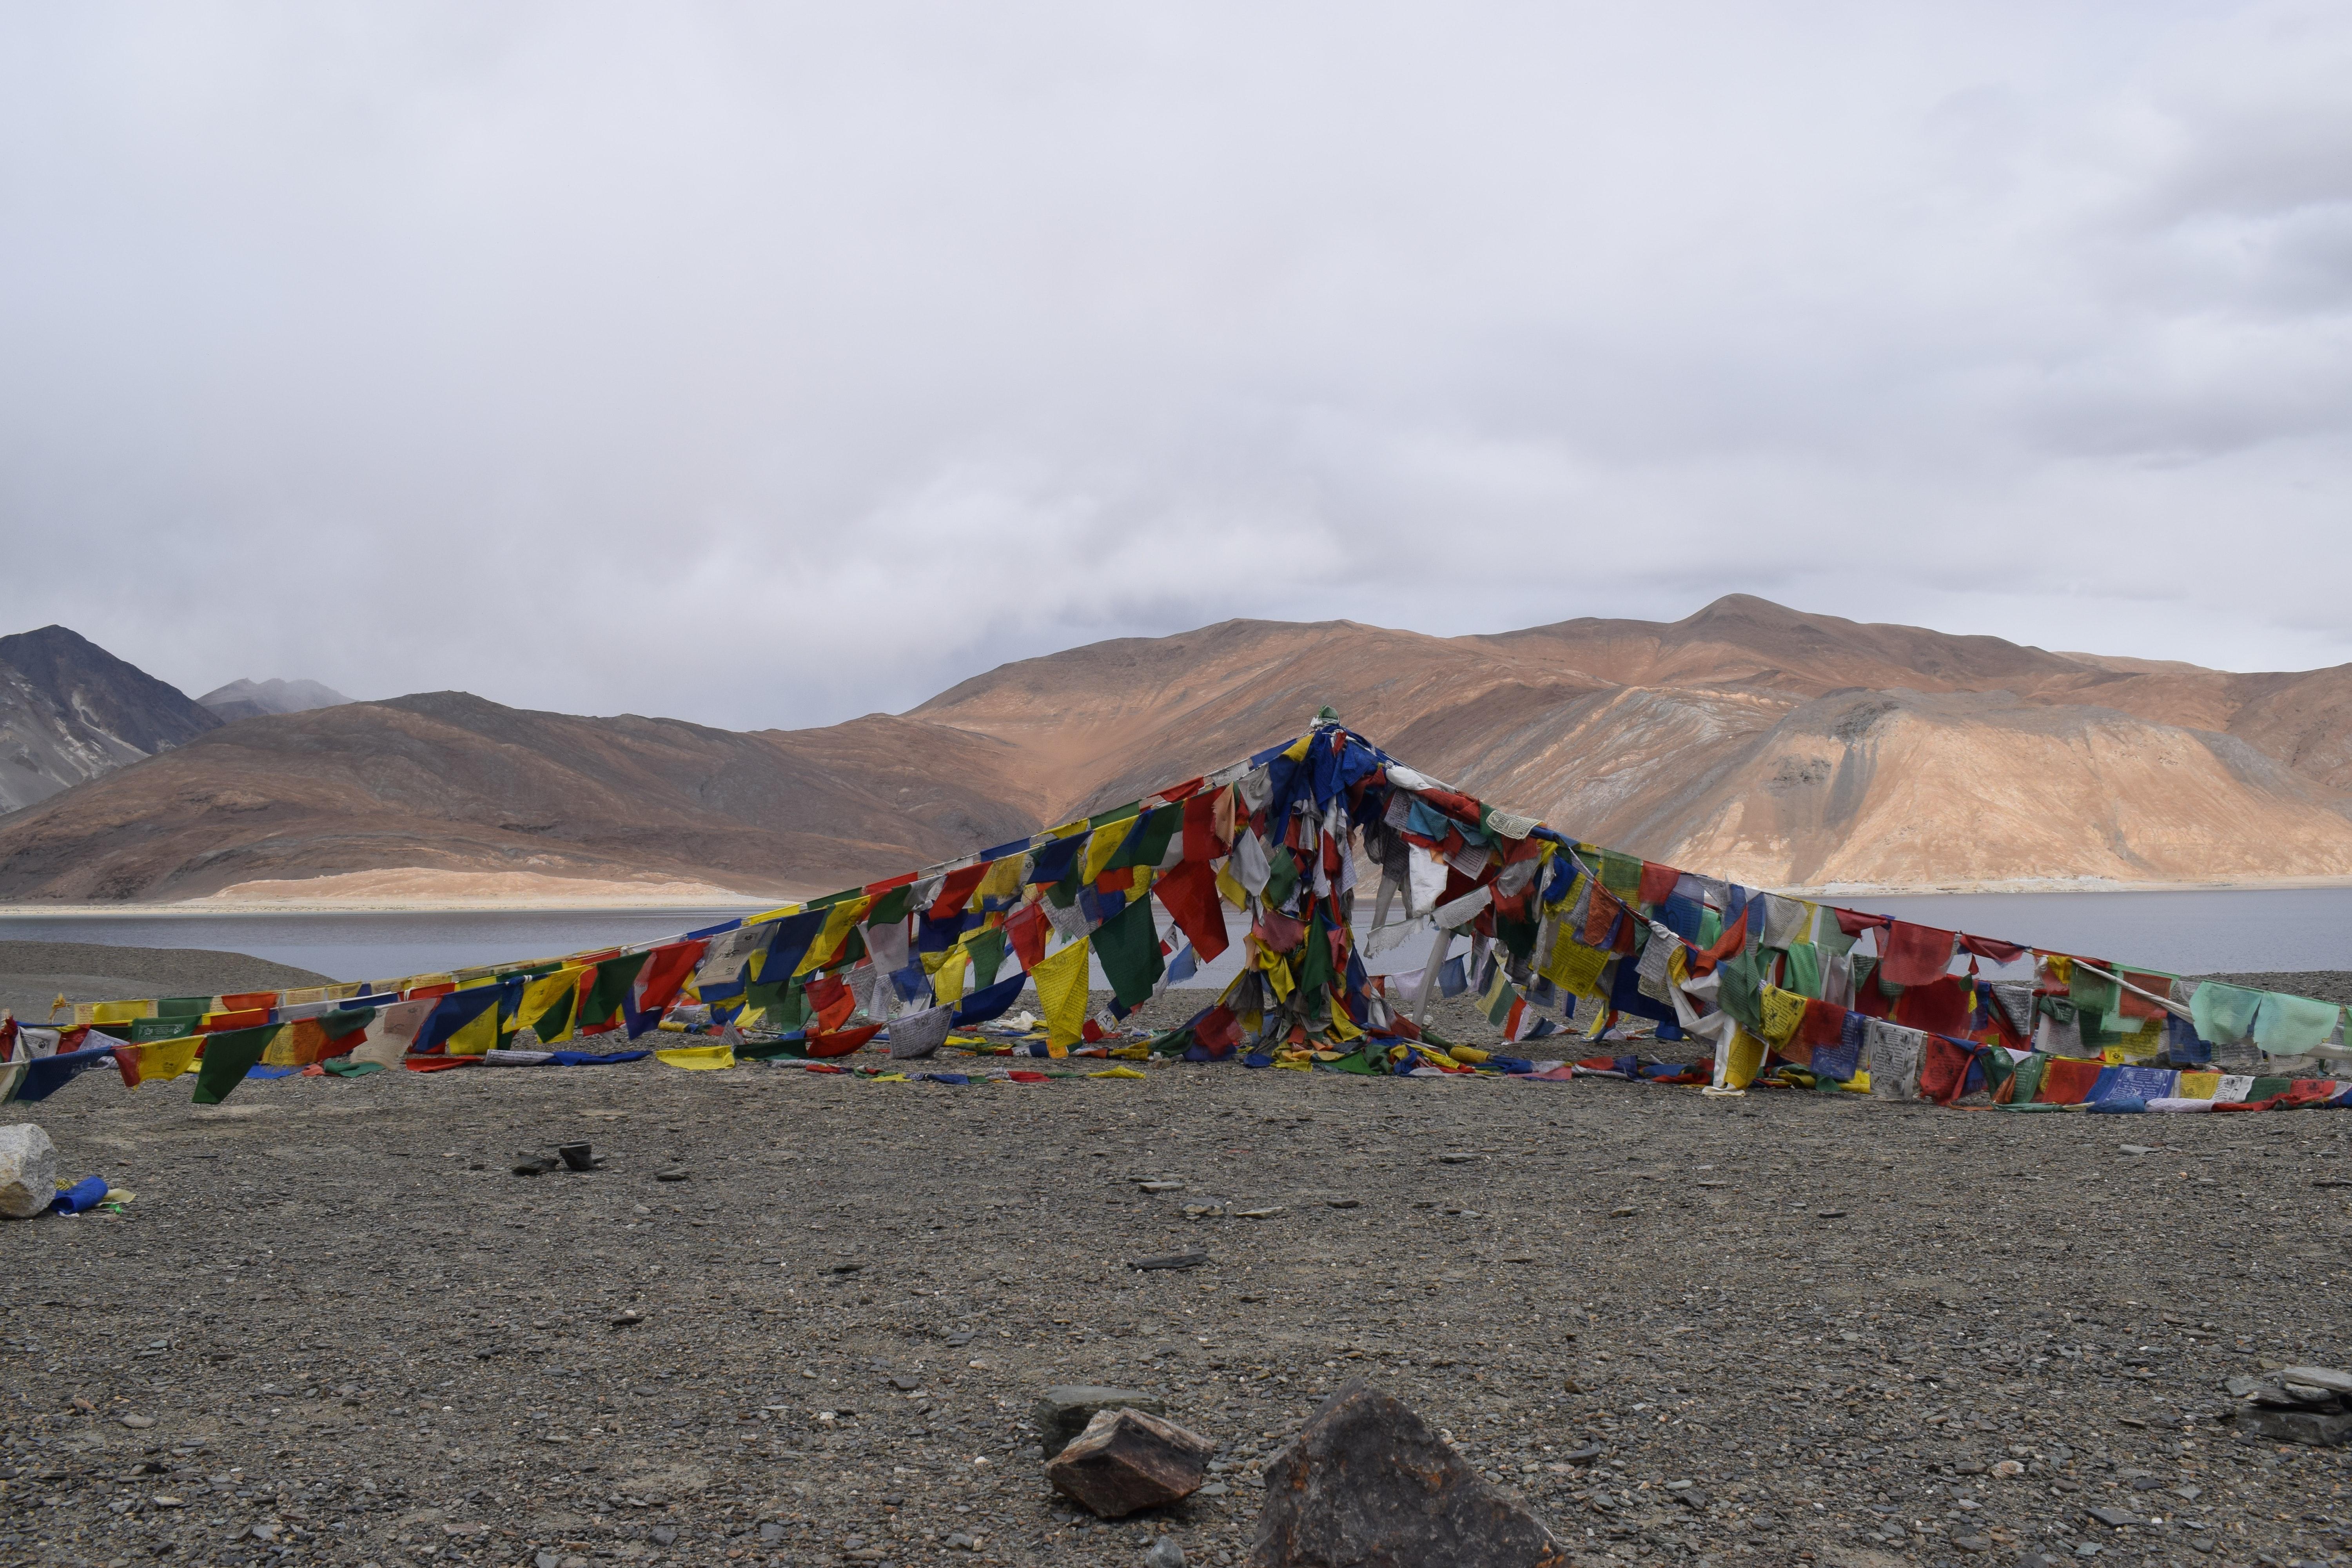 What natural disasters might occur in Tibet? 